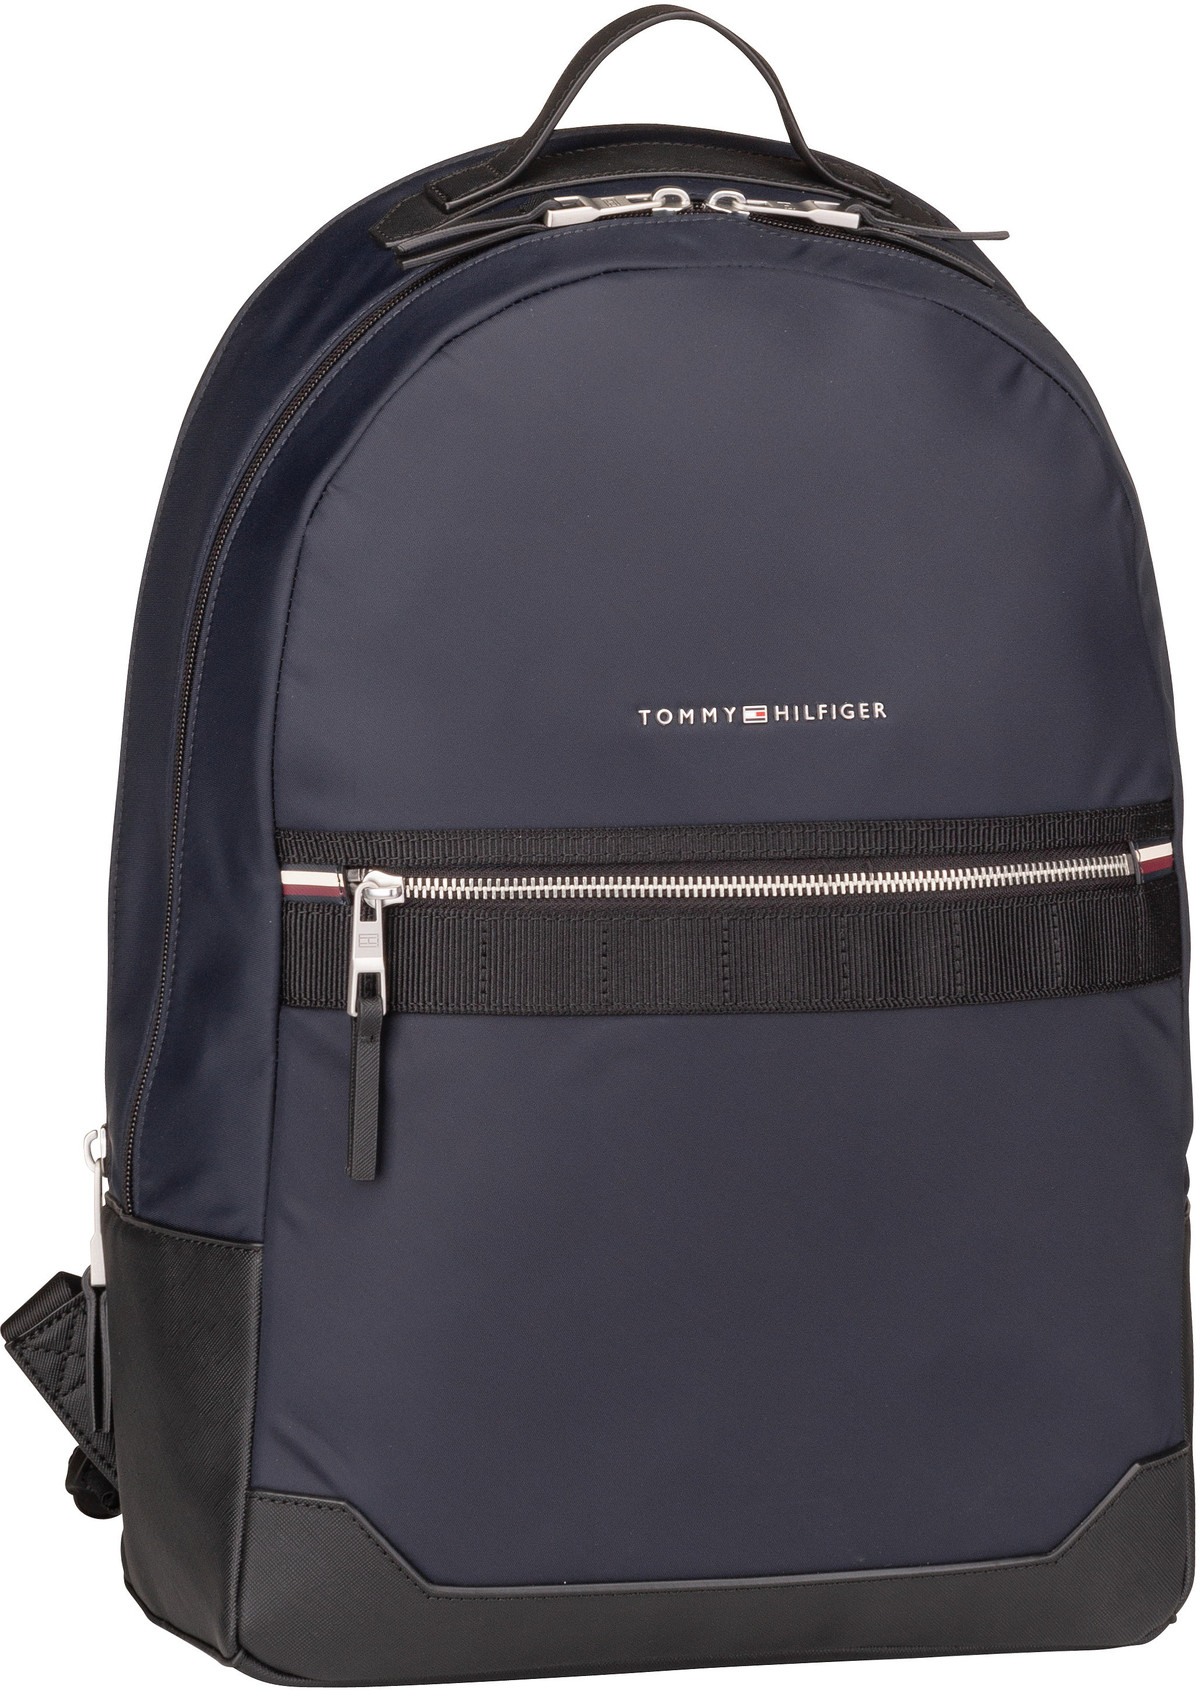 Tommy Hilfiger TH Elevated Nylon Backpack FA23  in Space Blue (17.6 Liter), Rucksack / Backpack